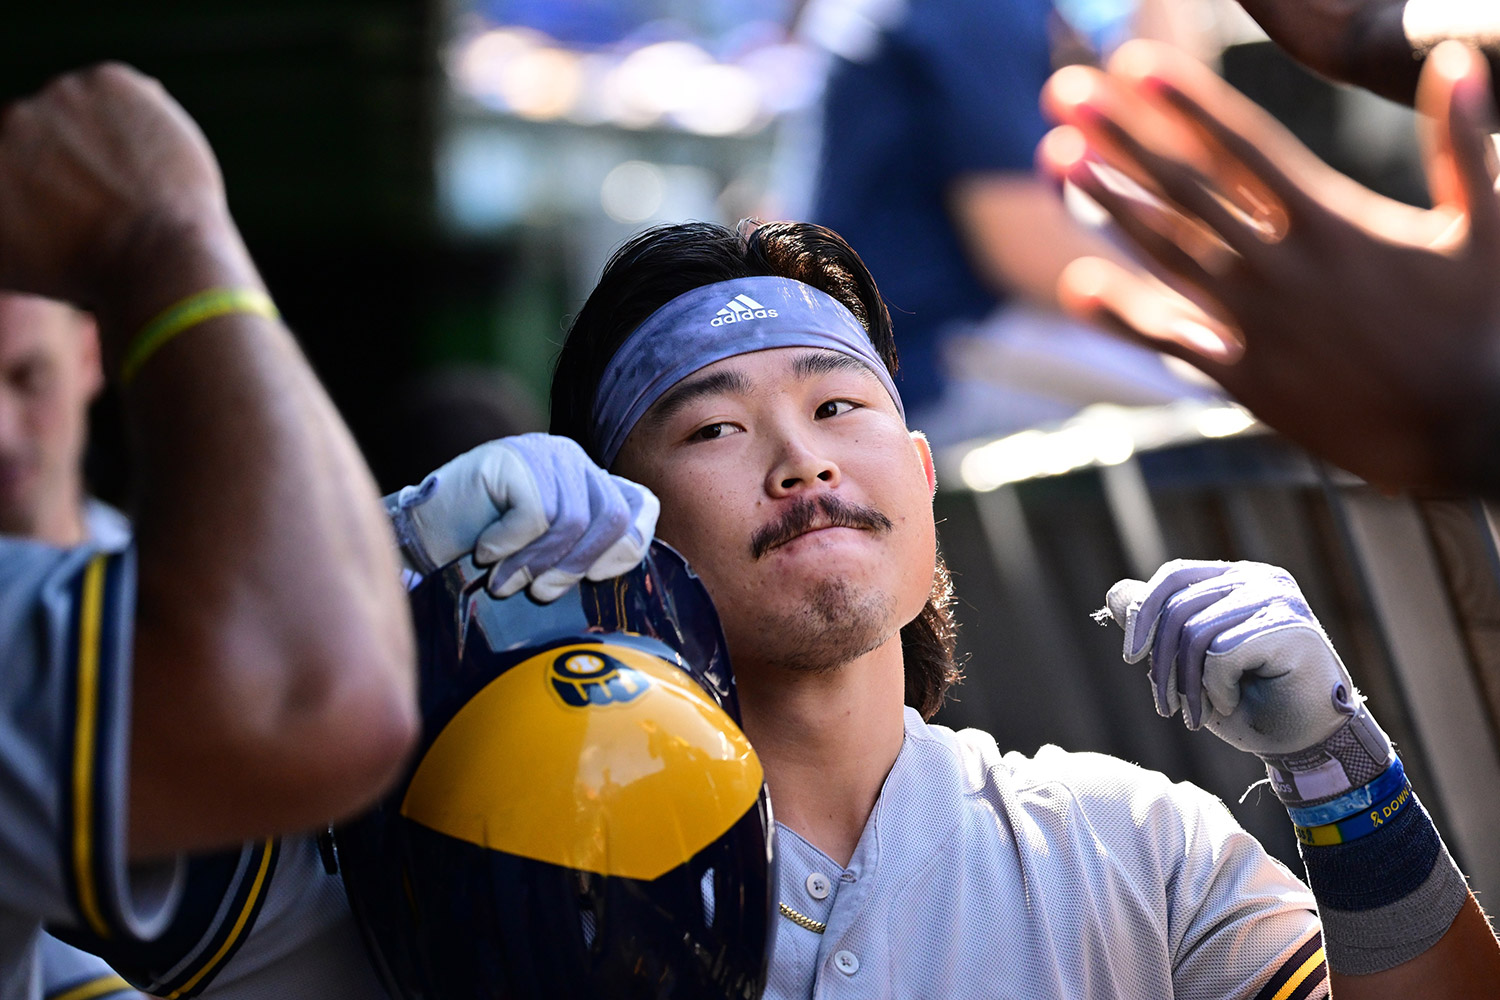 Why hasn't Keston Hiura been in the Milwaukee Brewers lineup more?